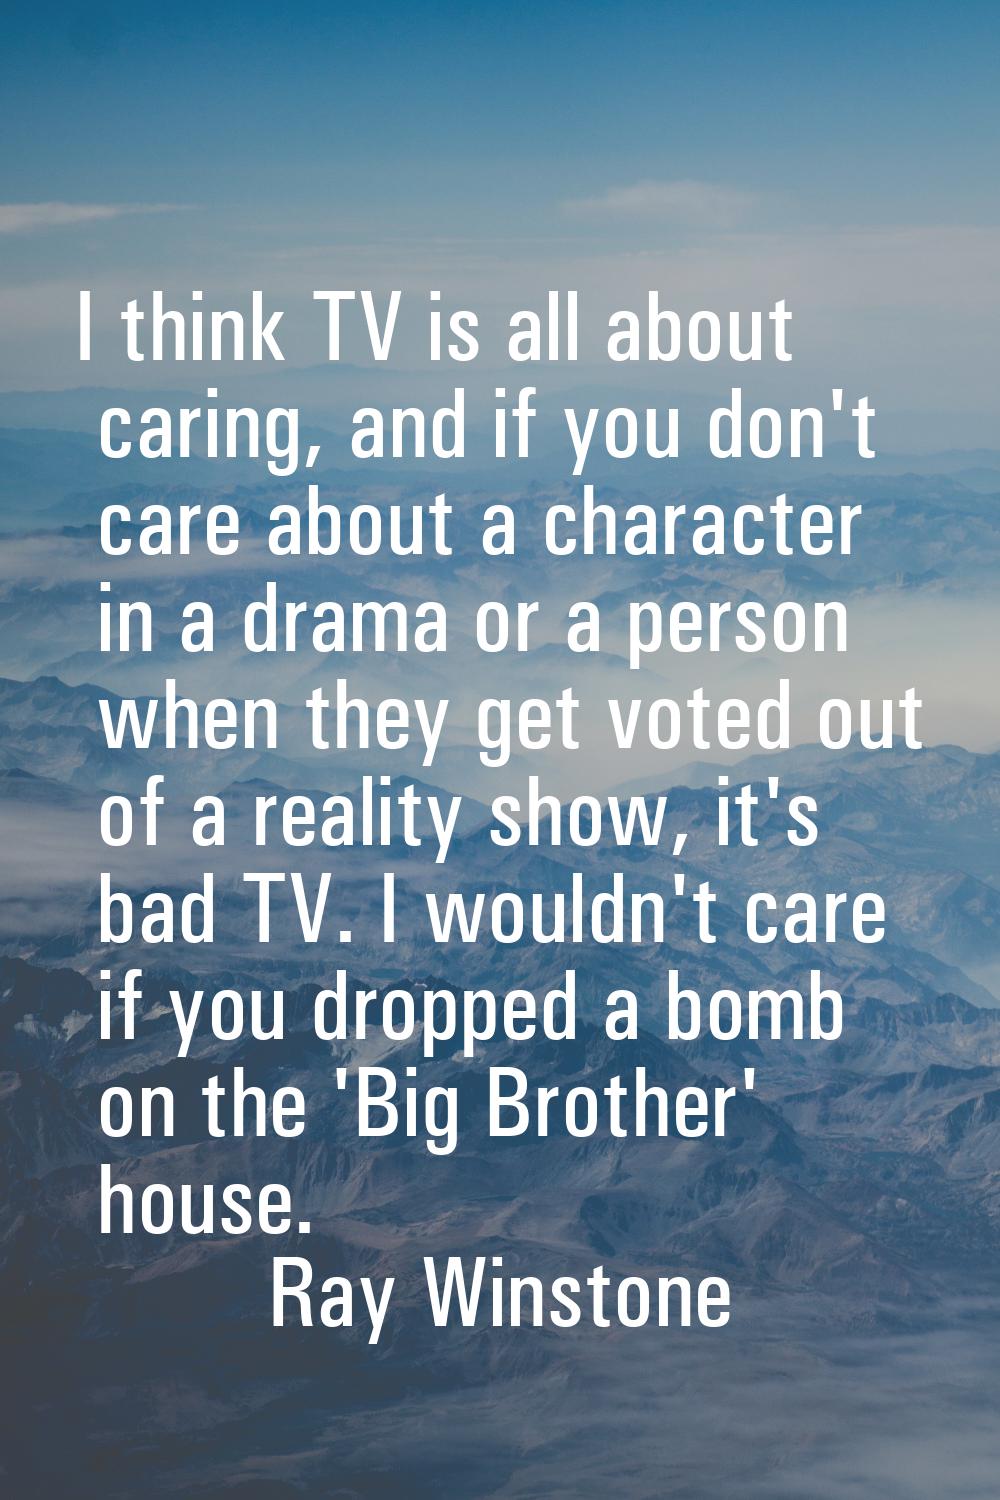 I think TV is all about caring, and if you don't care about a character in a drama or a person when